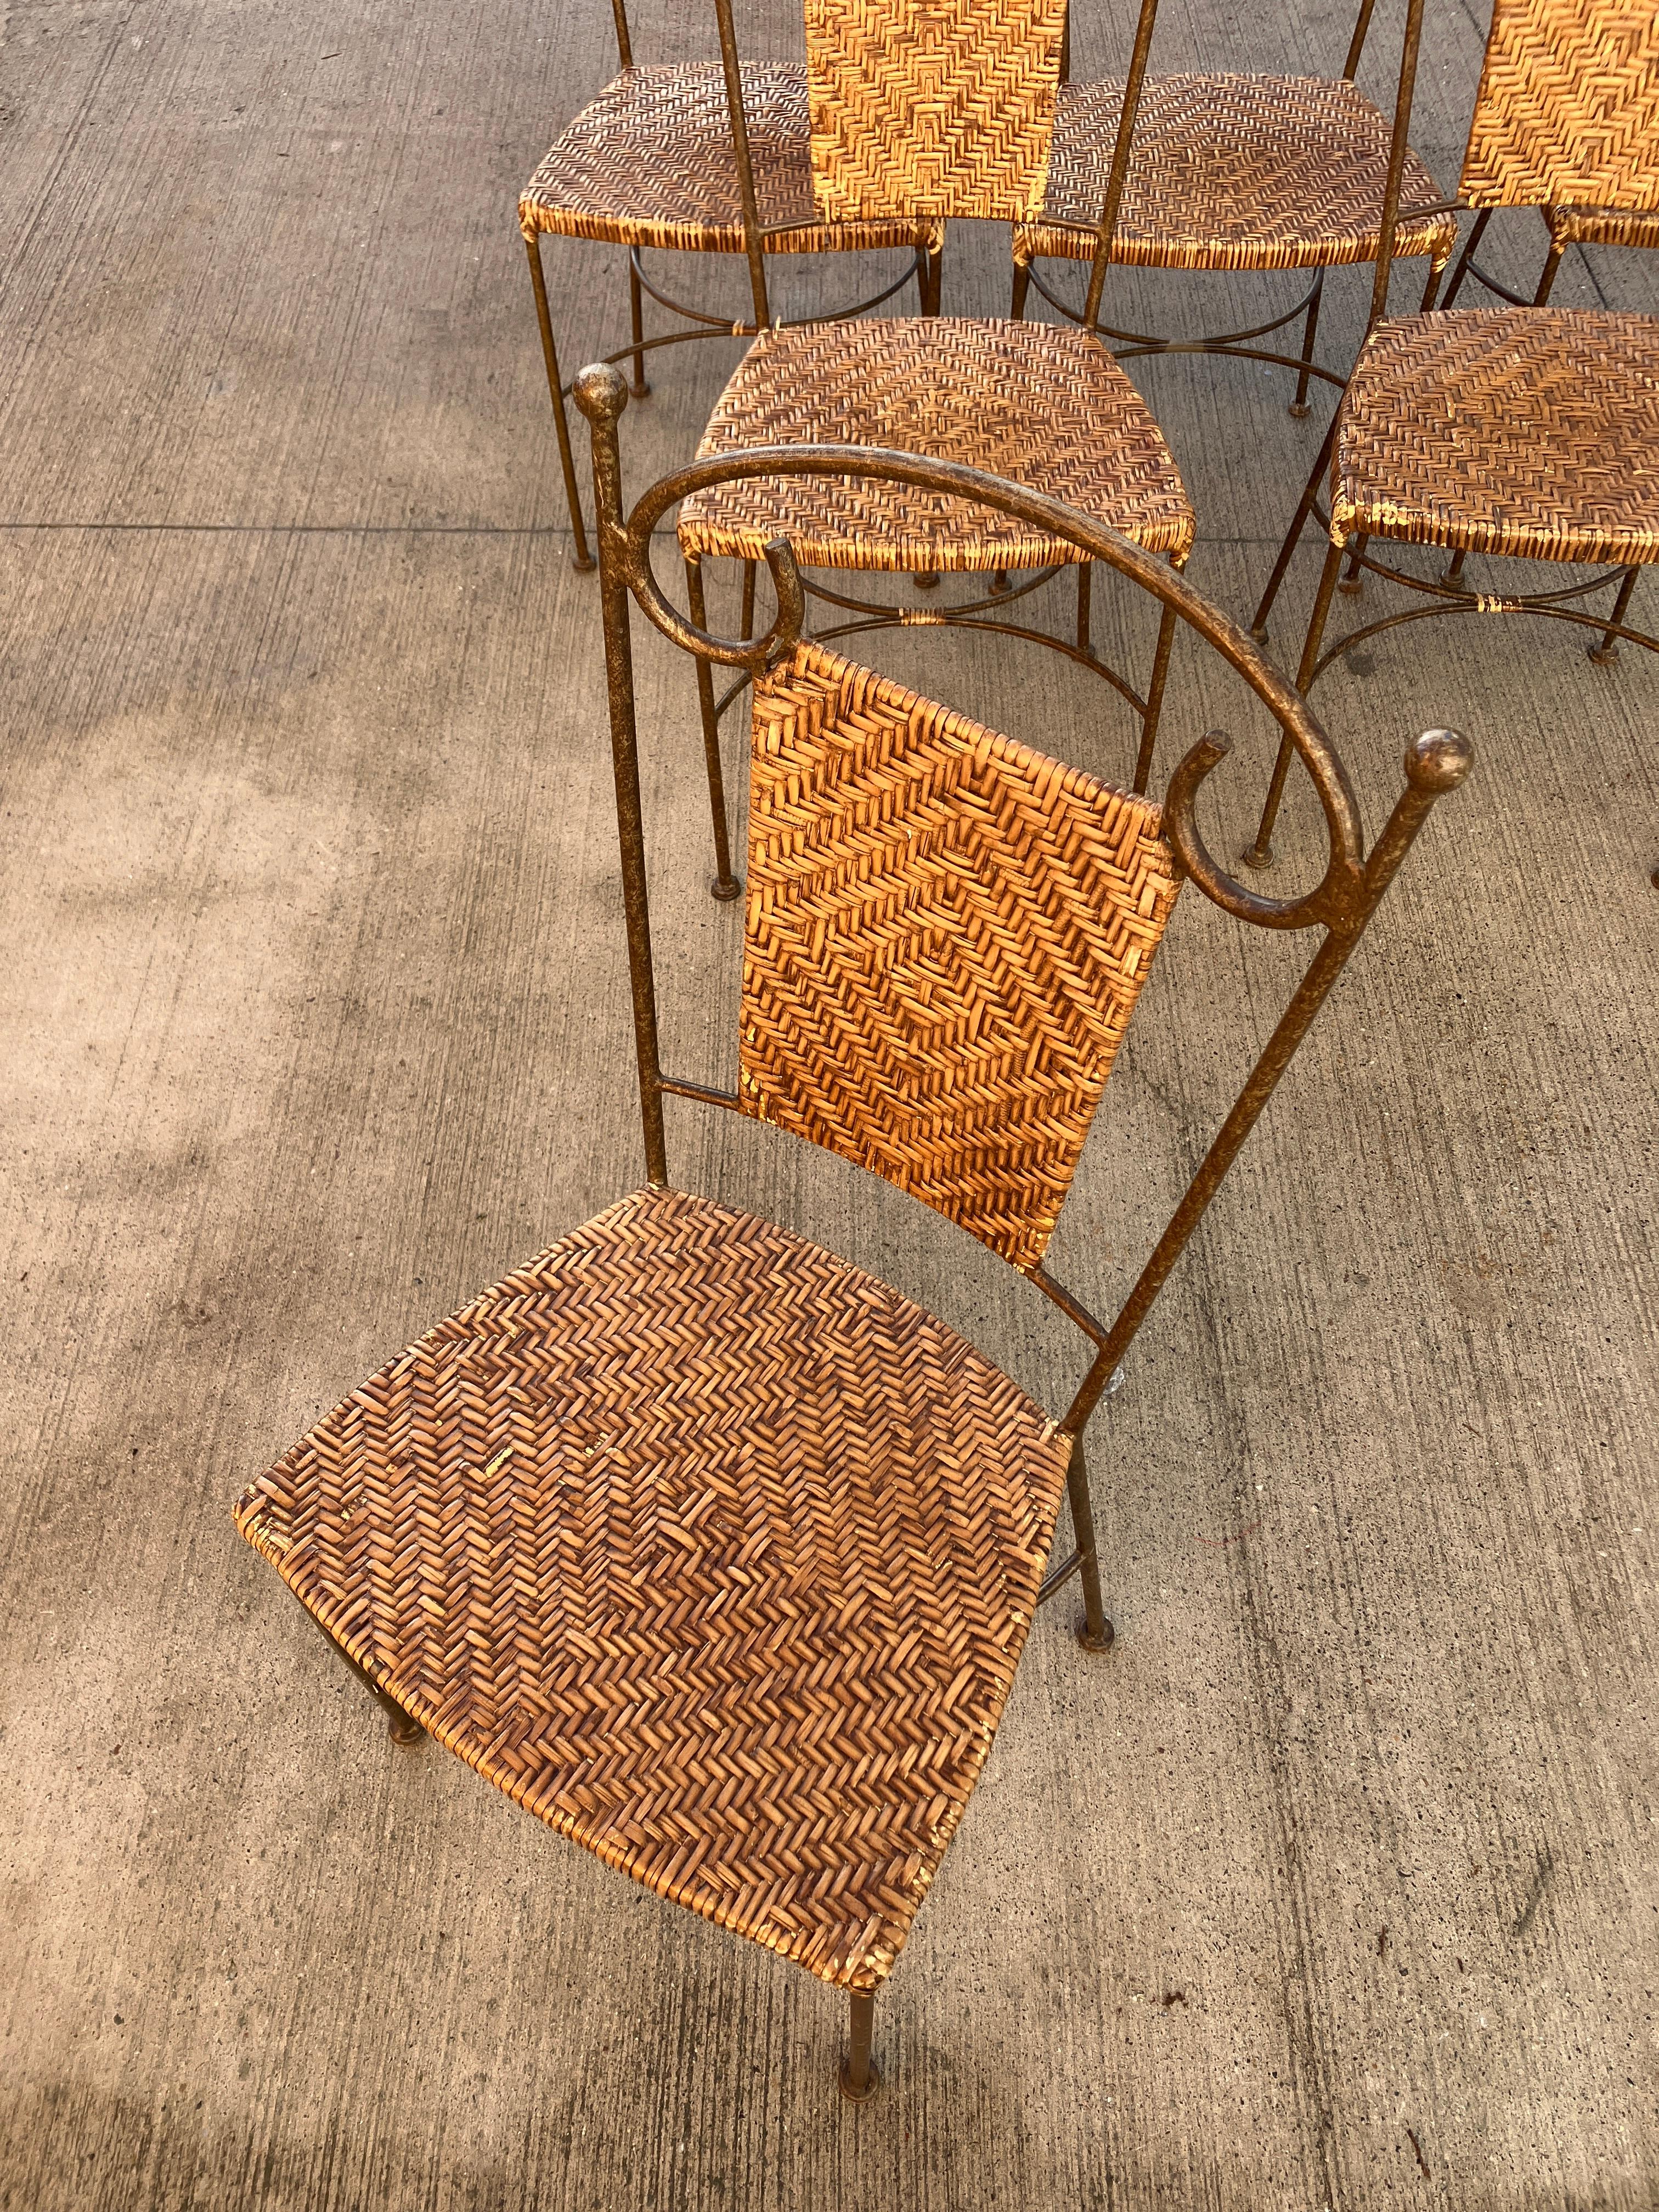 Vintage wrought Iron Dining Chairs with Wicker Seating x 6 1